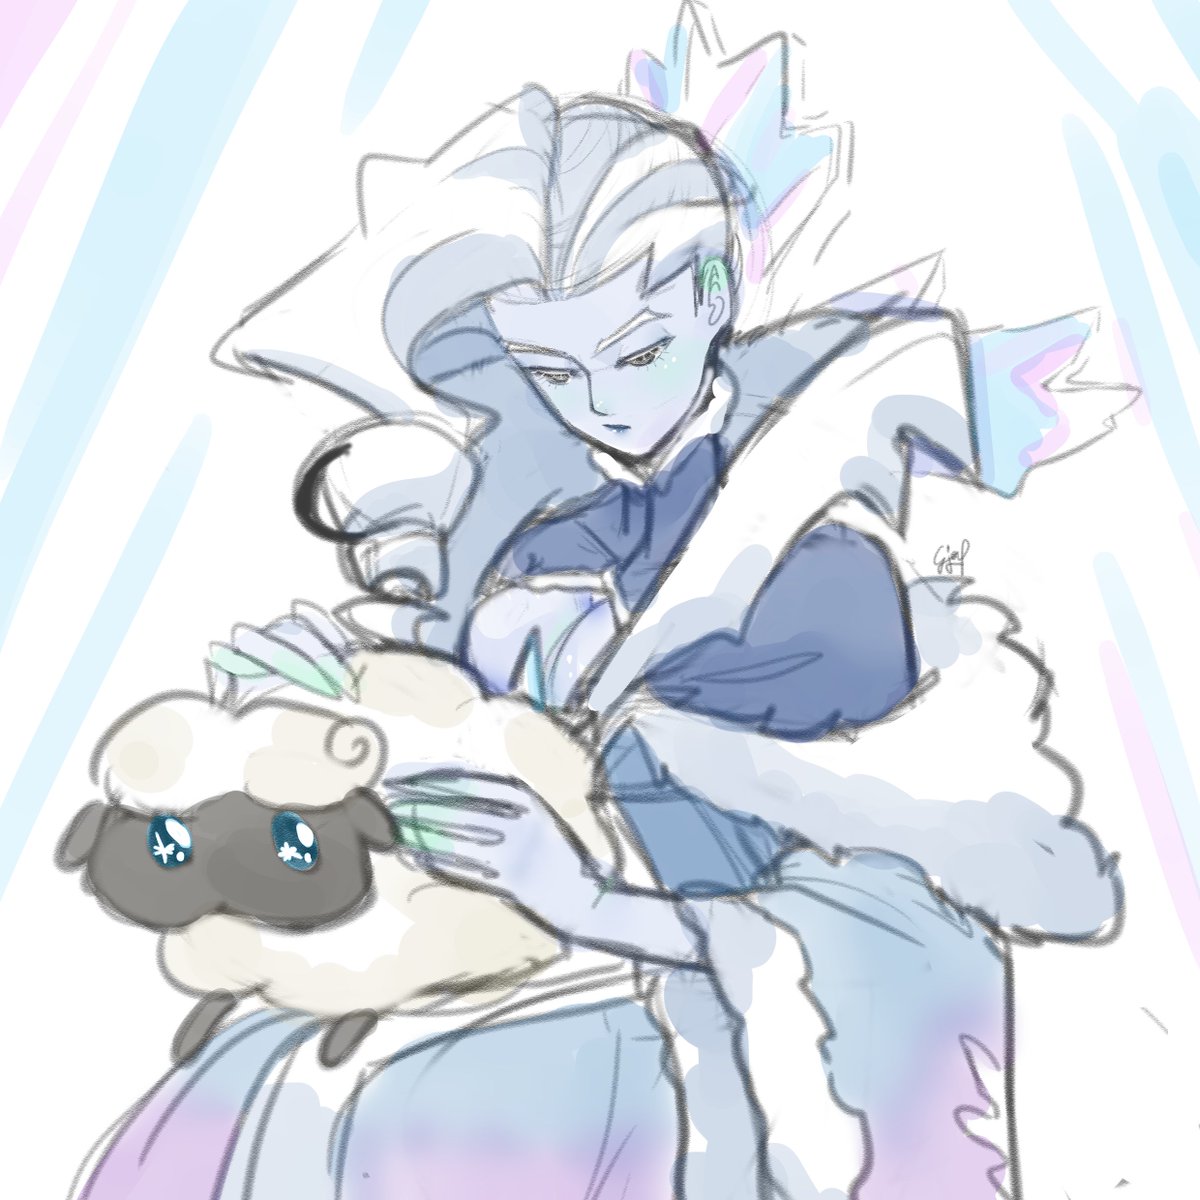 These new sheep are now populating my kingdom. The cookies will have to fly if they wanna go places.

#FrostQueenCookie #cookierunkingdom #cookierunfanart #frostqueen #fanart #cookierun